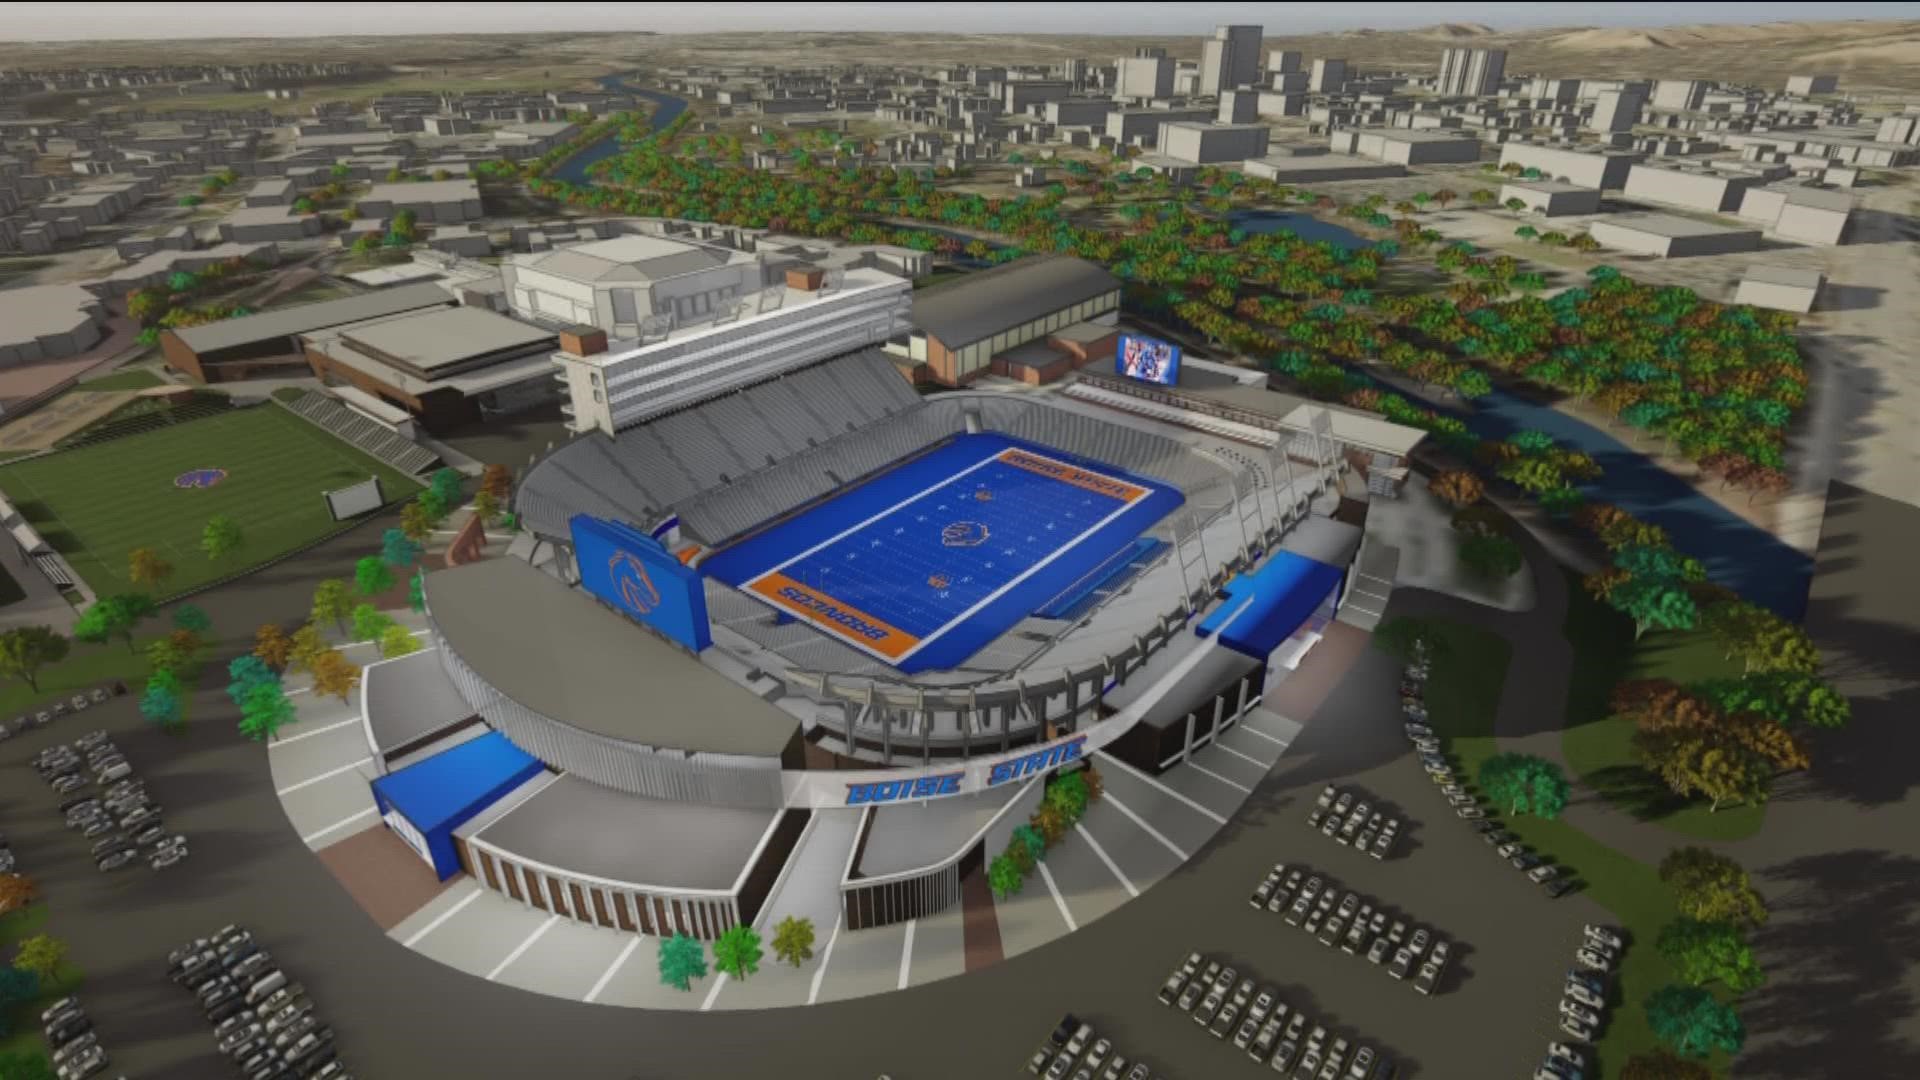 The Athletics Master Village would cost more than $300 million, including $81.1 million in Albertsons Stadium upgrades and $48.3 million for a New Varsity Center.